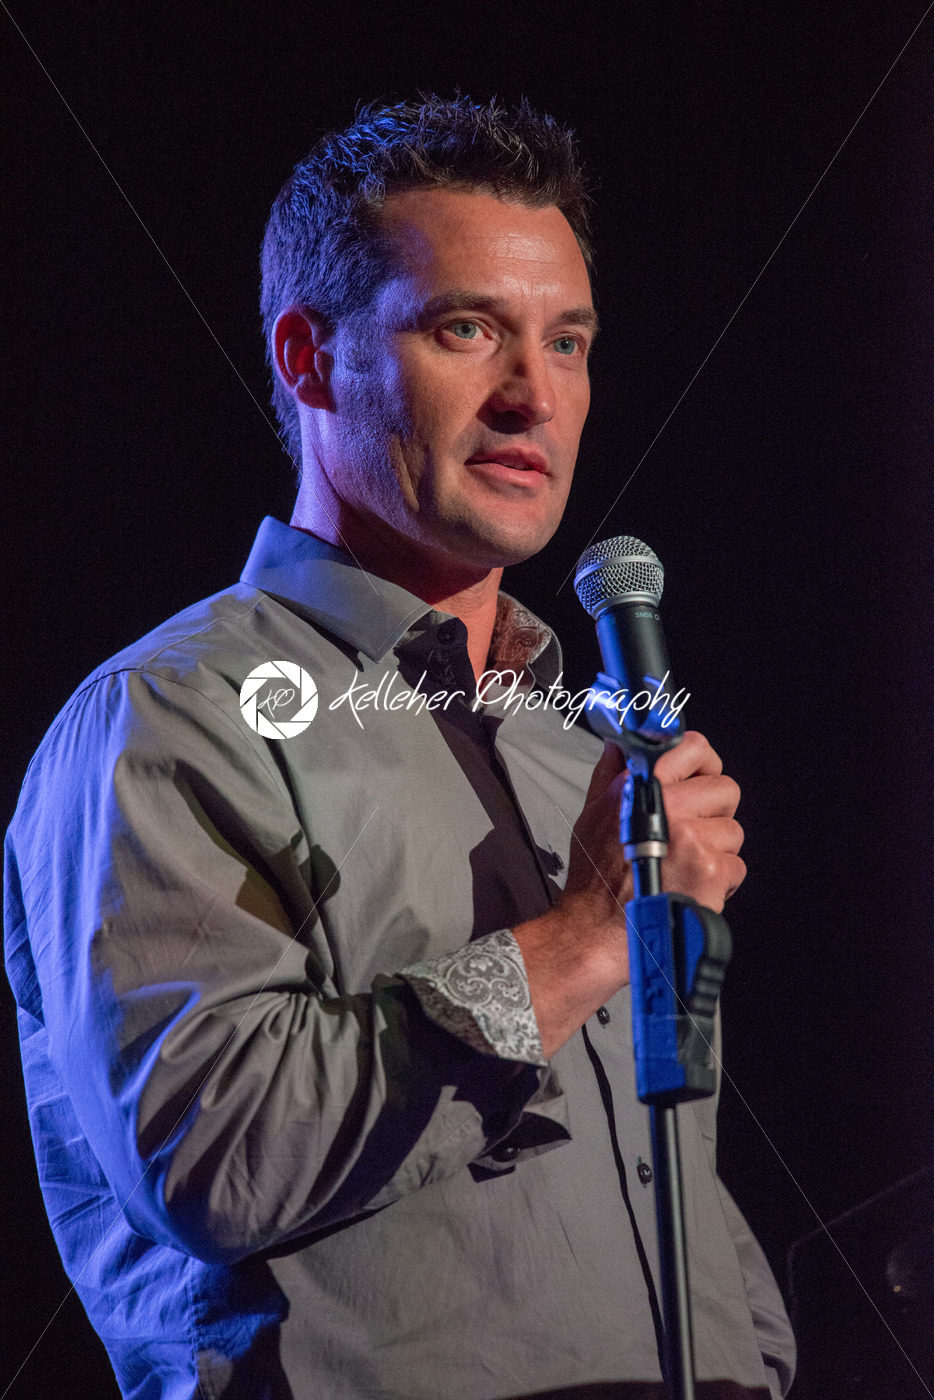 VALLEY FORGE CASINO, KING OF PRUSSIA, PA – JULY 15: Comcast SportsNet anchor John Boruk speaking at Kendall’s Crusade fundraising event on July 15, 2017 - Kelleher Photography Store